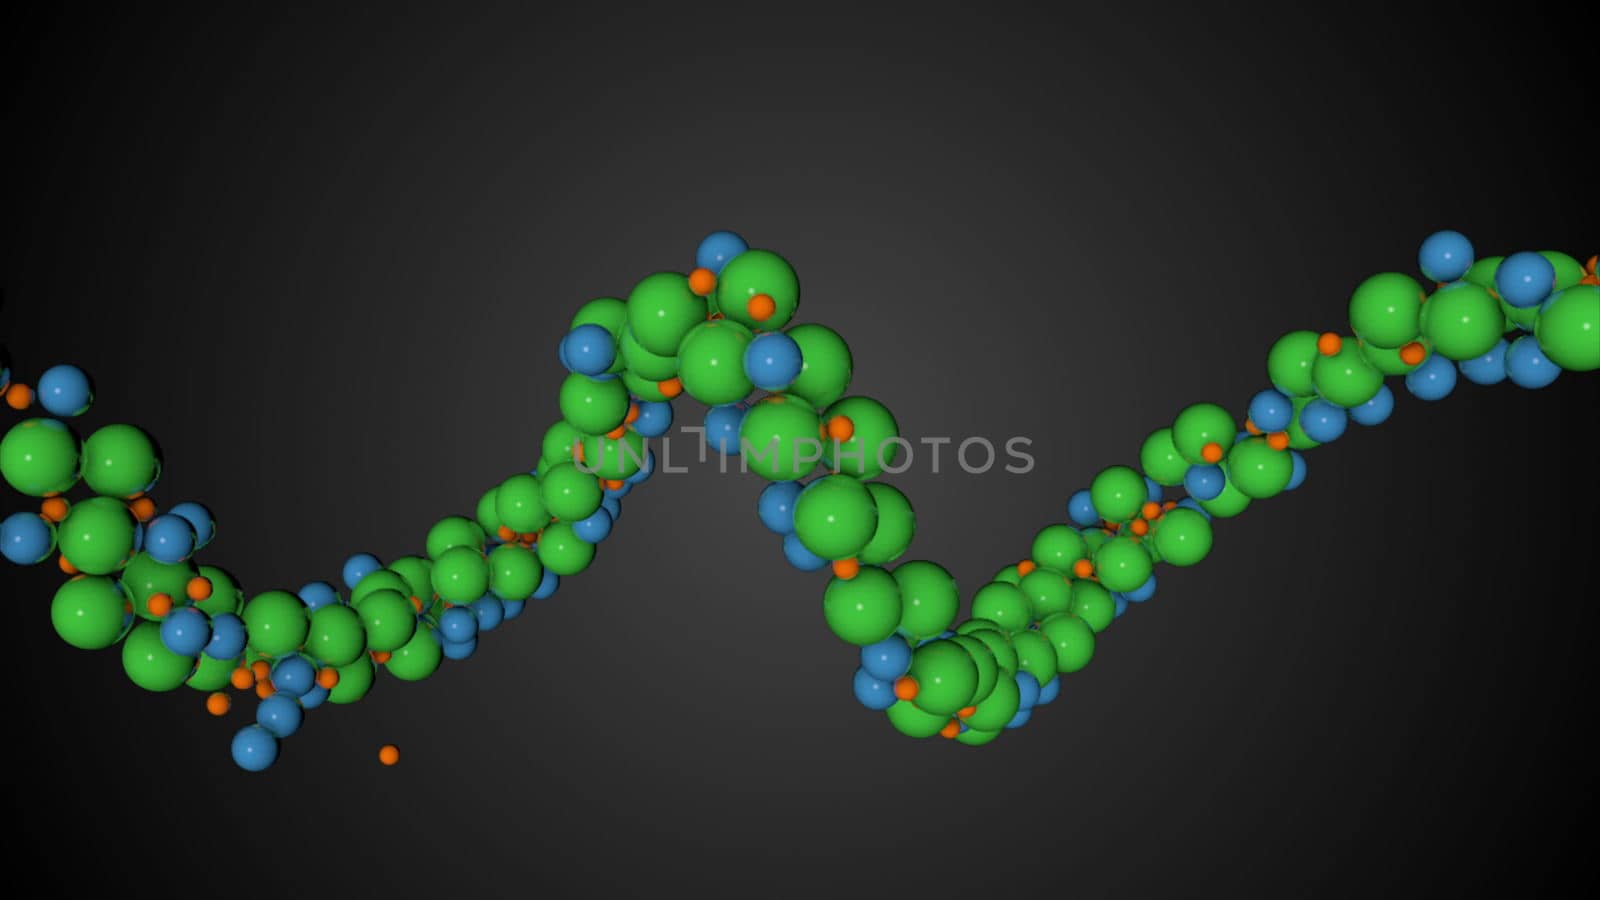 Abstract background with waving realistic balls on dark background. 3d rendering technology concept